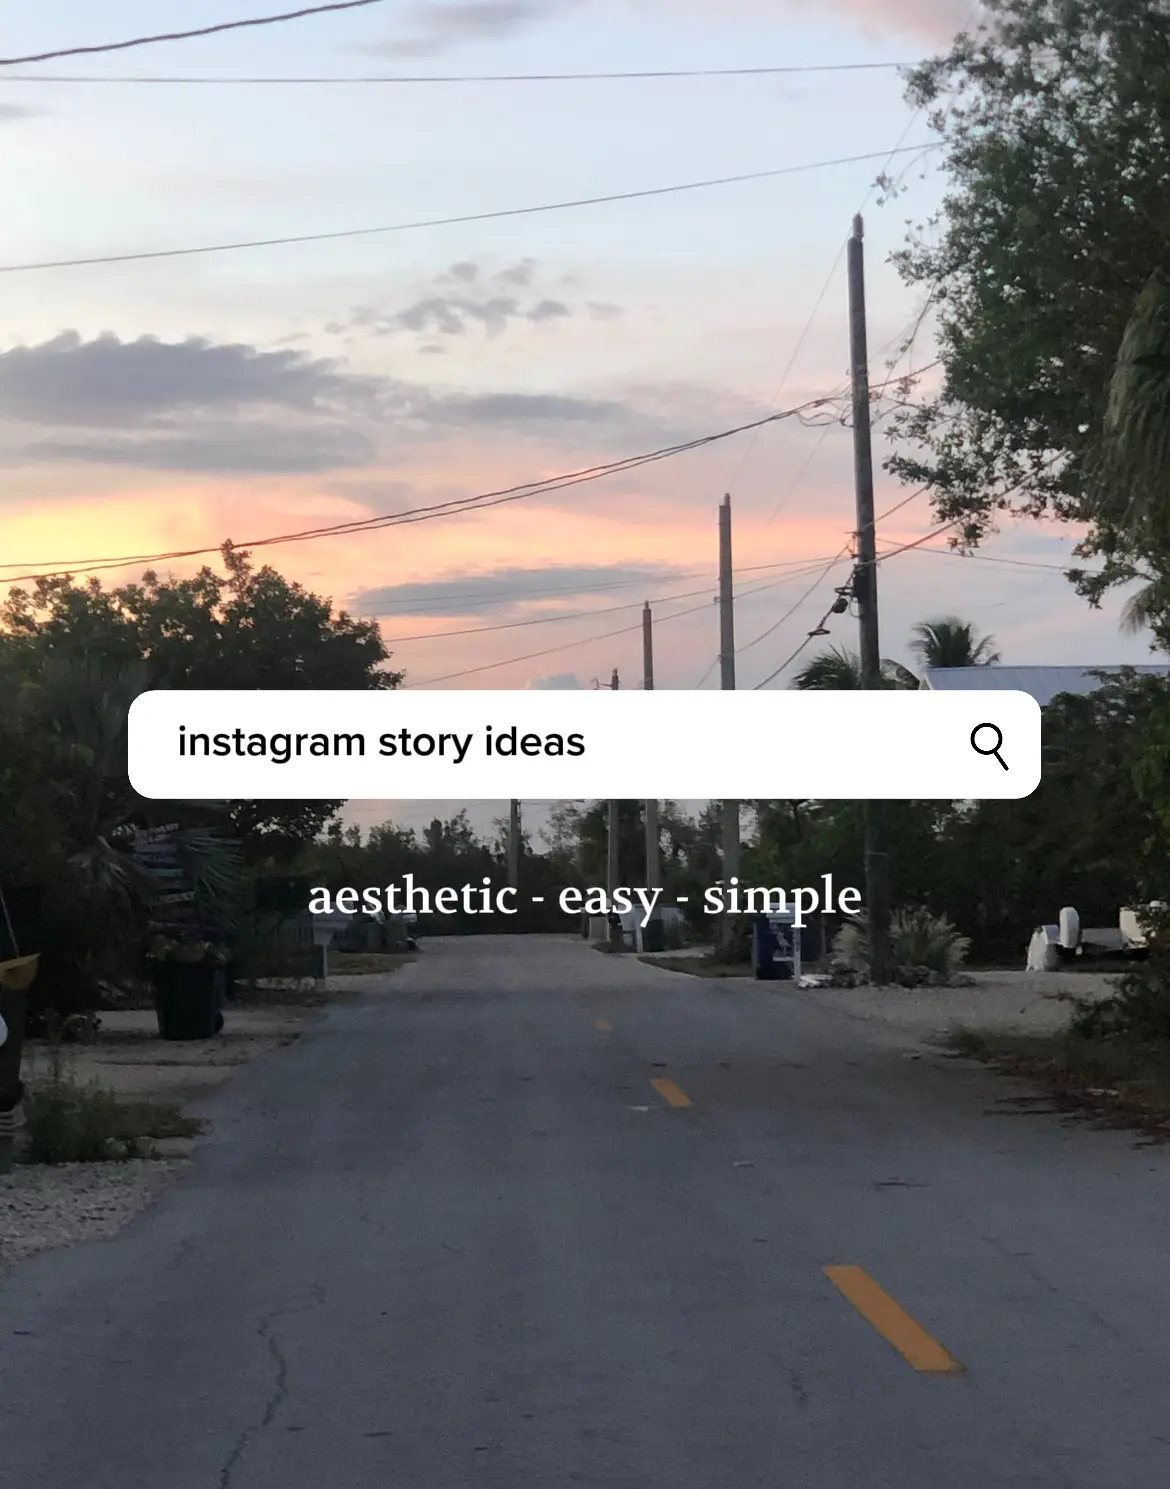 instagram story ideas's images